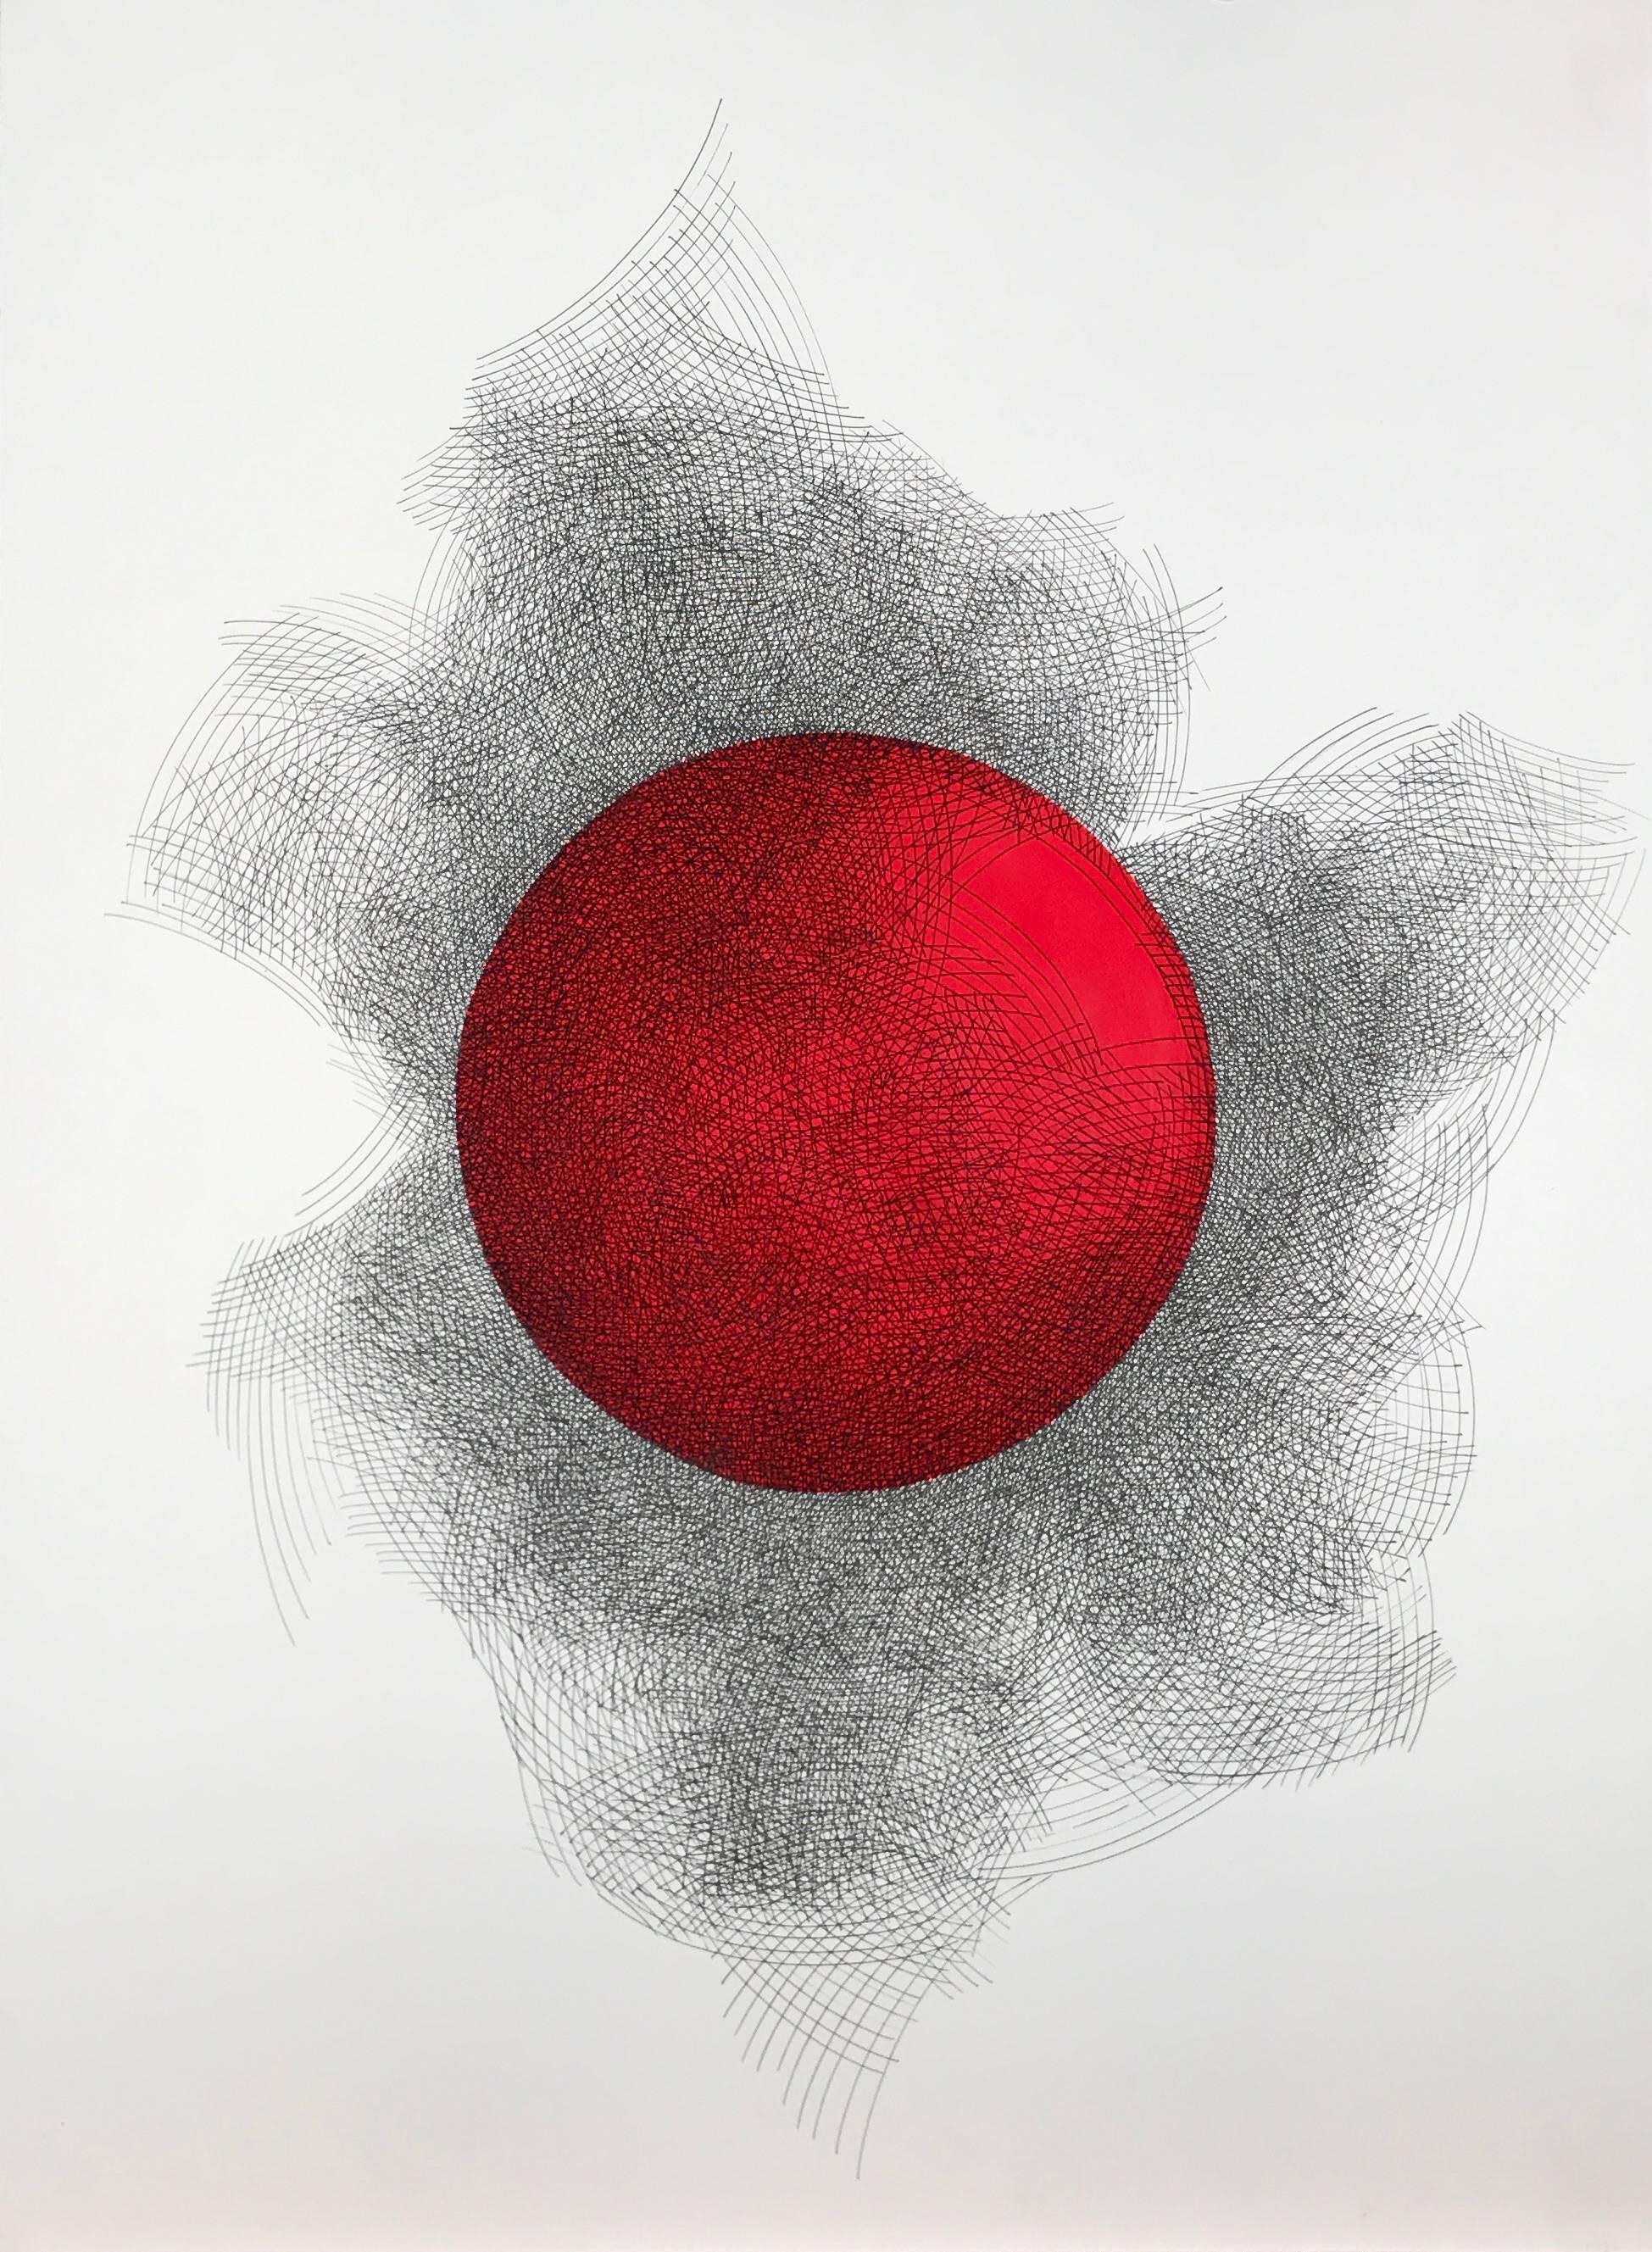 Matilde Alessandra Abstract Drawing - Untitled #33